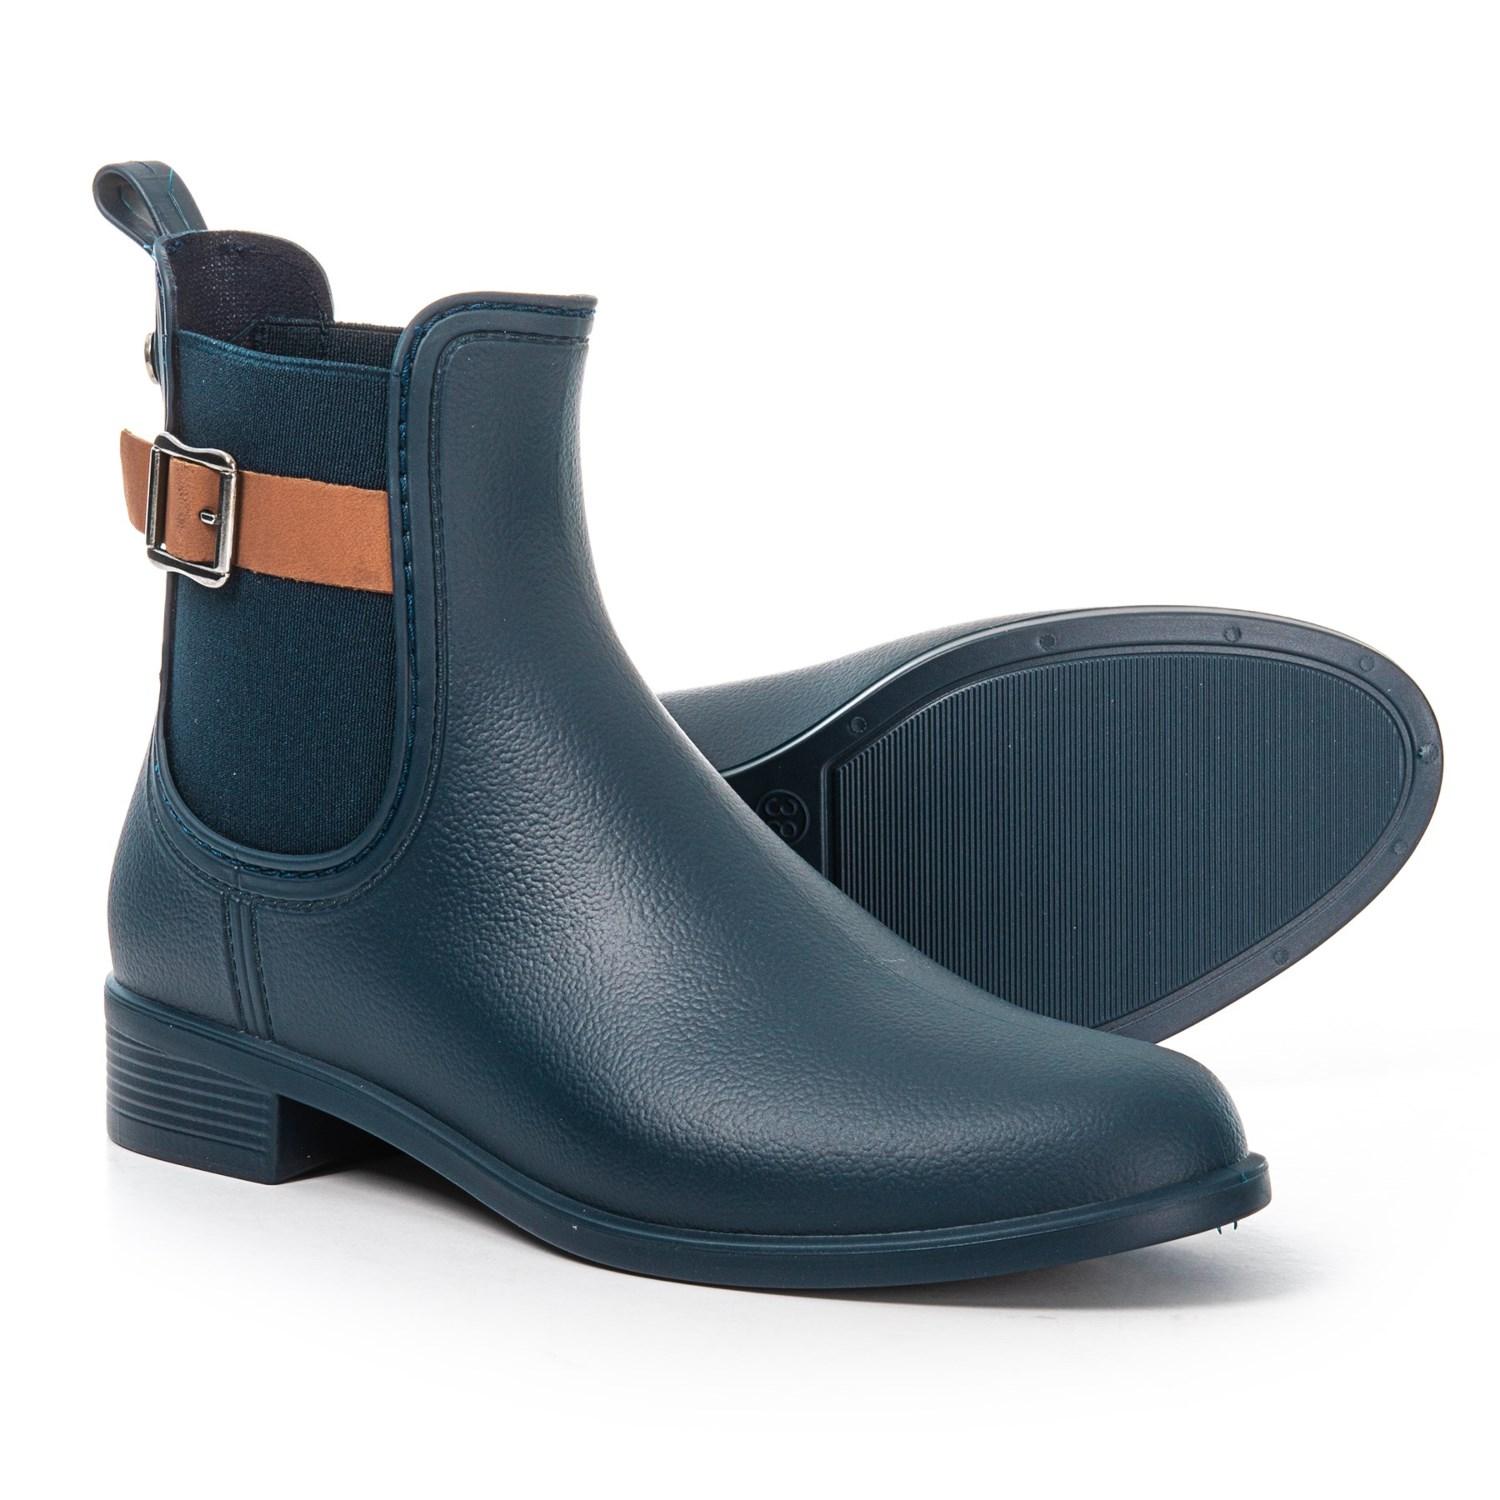 IGOR Made In Spain Urban Ankle Rain Boots in Navy (Blue) - Lyst